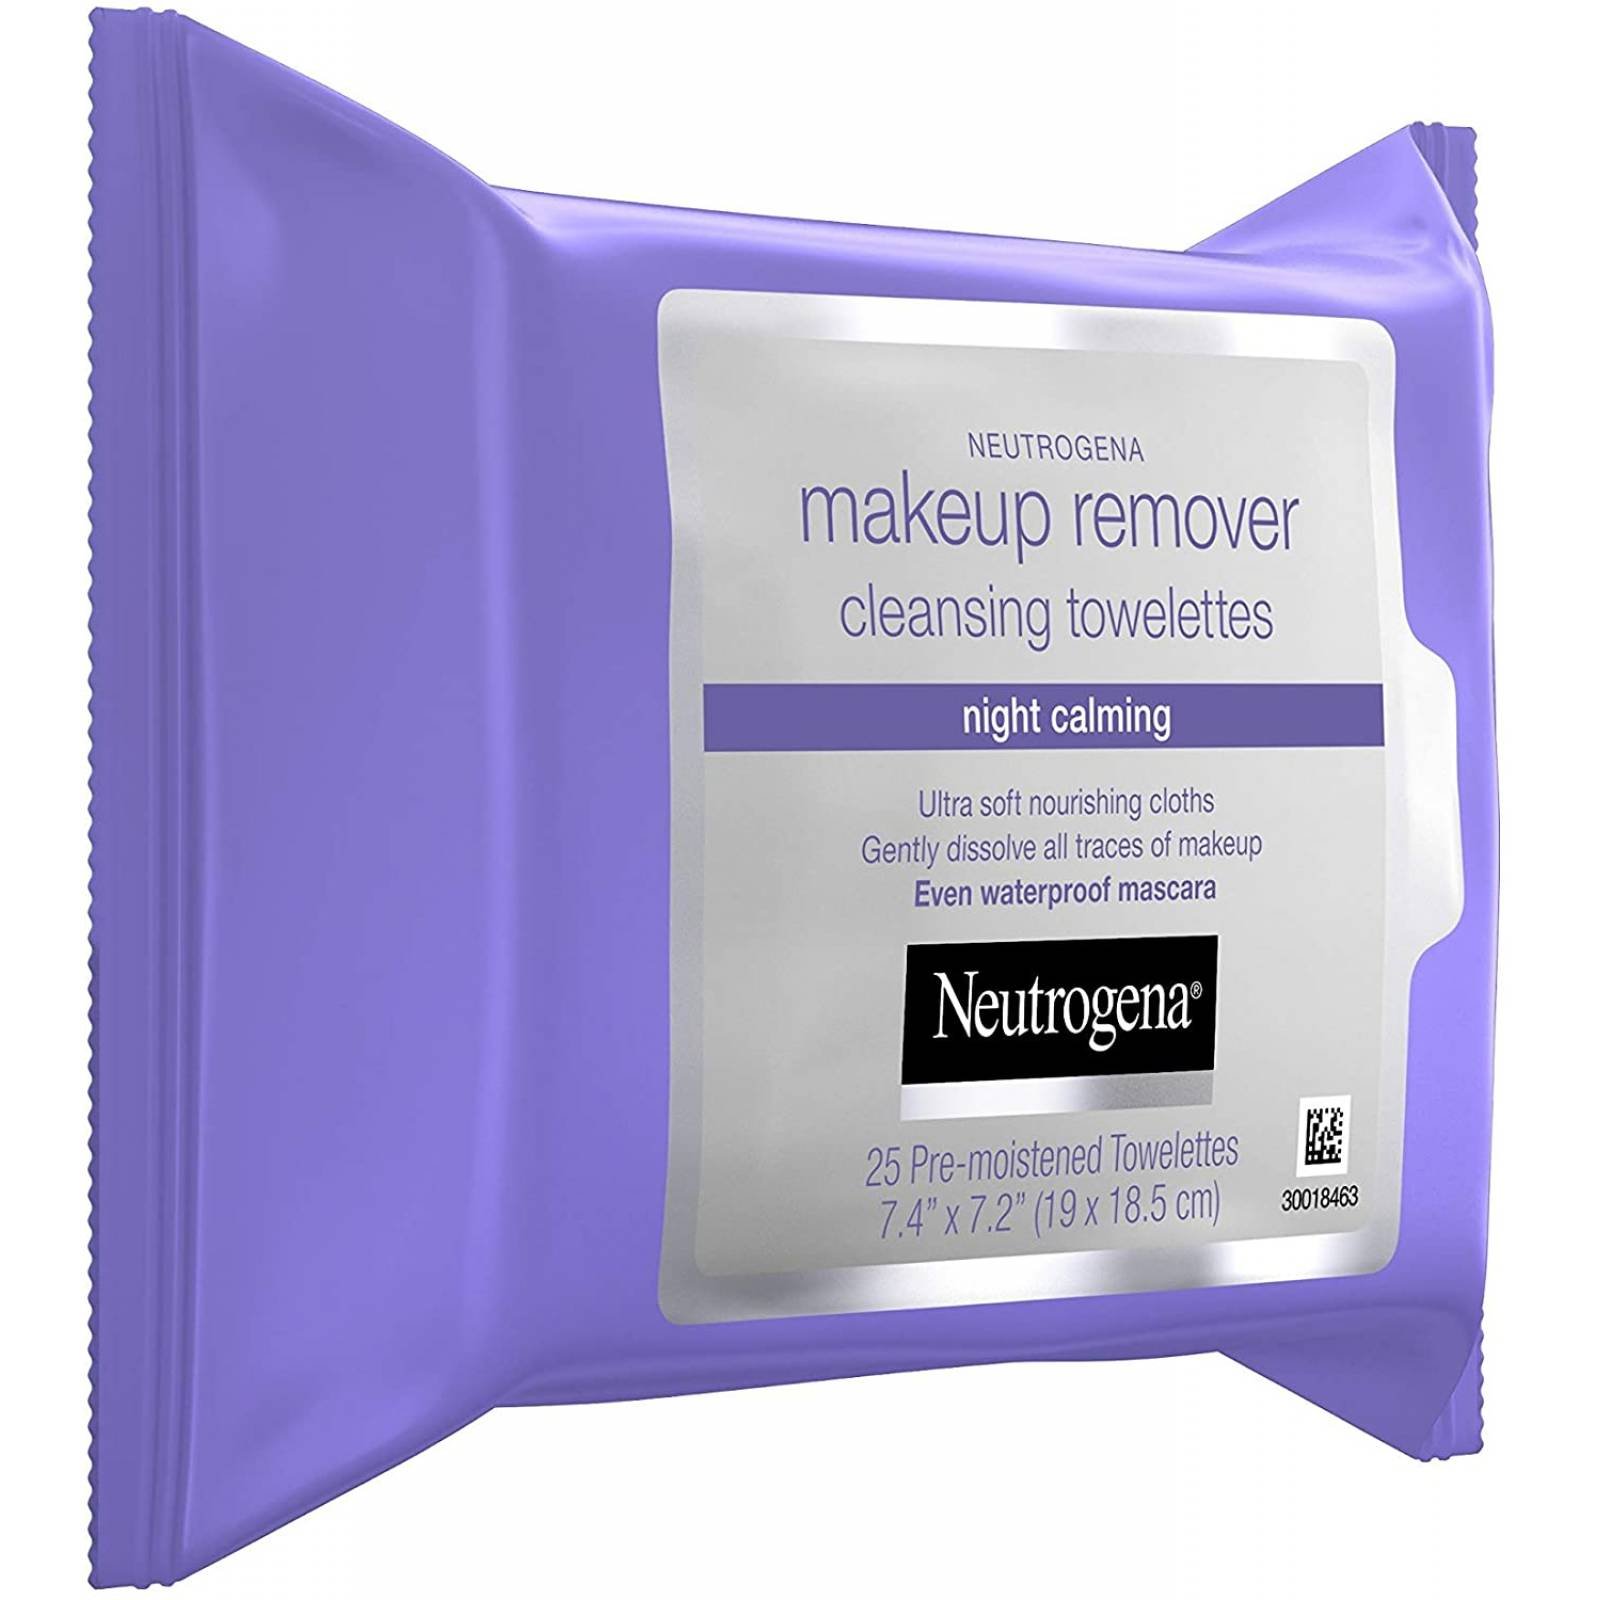 Neutrogena Makeup Remover 114 Cleansing Towelettes